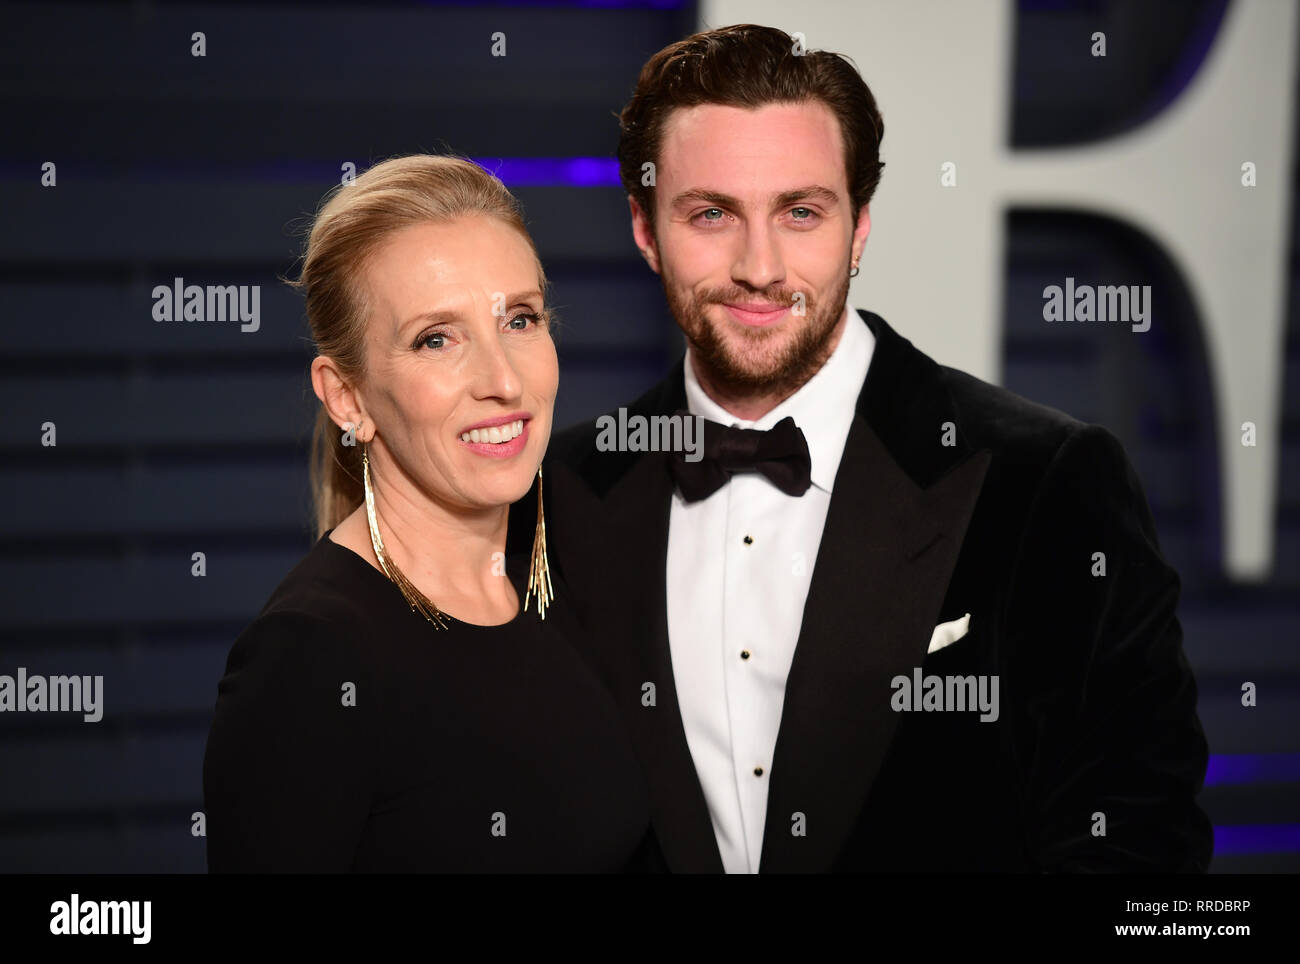 Sam Taylor-Johnson and Aaron Taylor-Johnson attending the Vanity Fair Oscar Party held at the Wallis Annenberg Center for the Performing Arts in Beverly Hills, Los Angeles, California, USA. Stock Photo